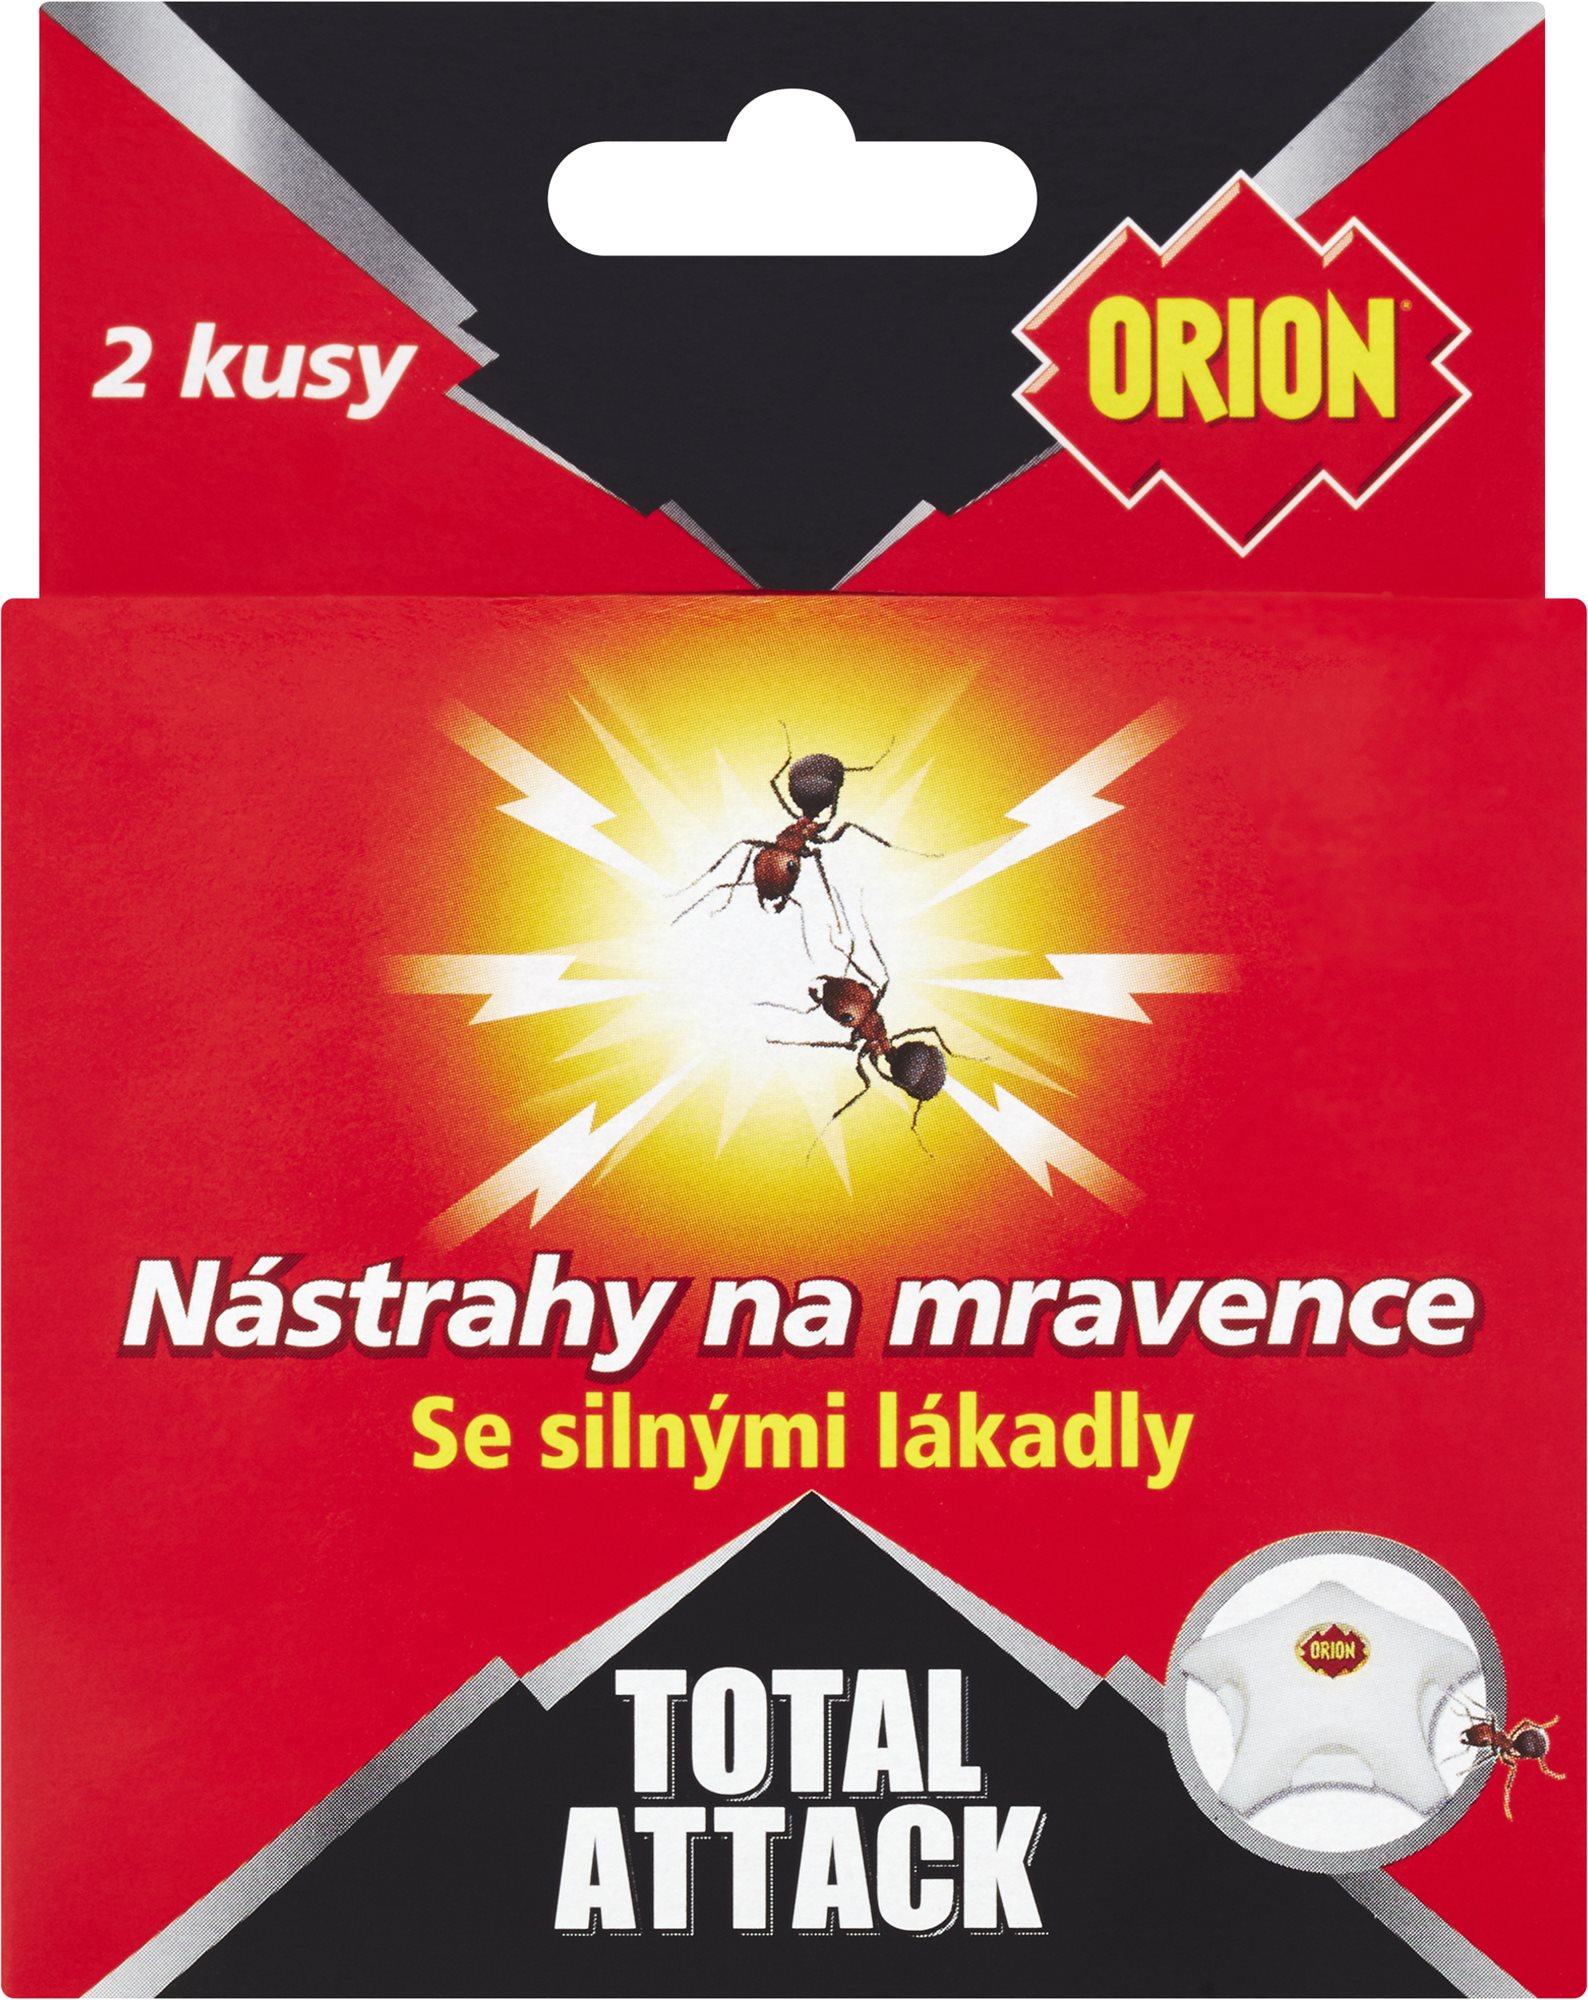 ORION Total attack hangyacsali